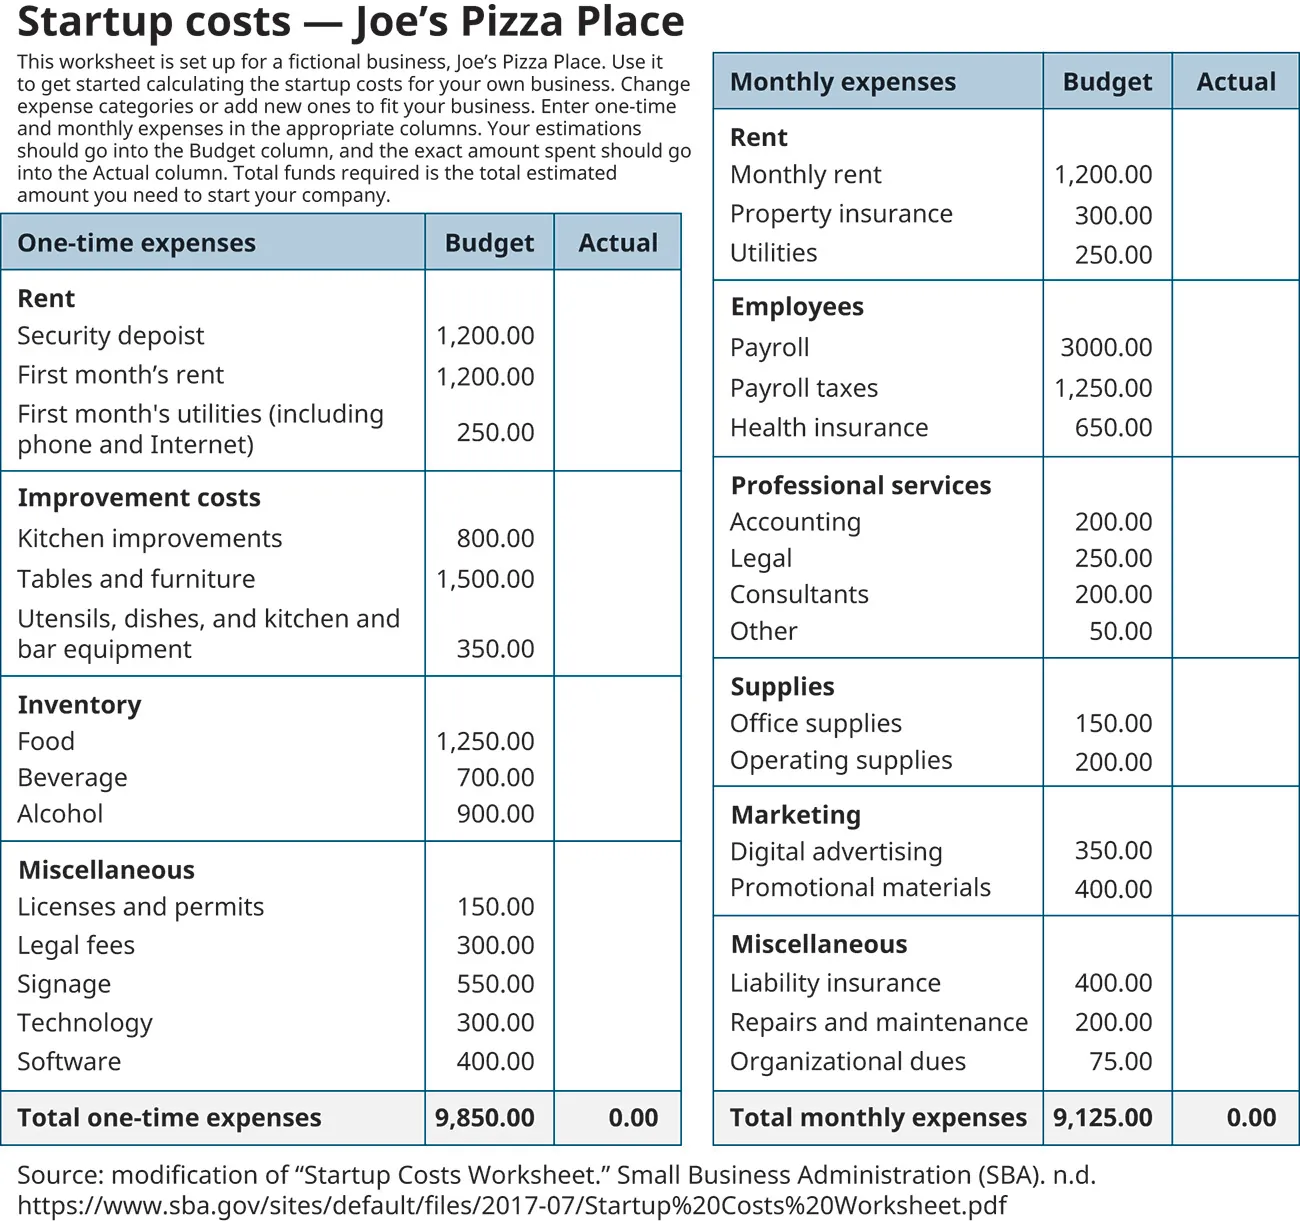 Worksheet of startup costs for Joe’s Pizza Place include one-time expenses like improvement costs, some aspects of rent (like security deposit), inventory, and miscellaneous (like signage), and monthly expenses, like rent, employee wages, professional services, supplies, marketing, and miscellaneous, like repairs and maintenance.